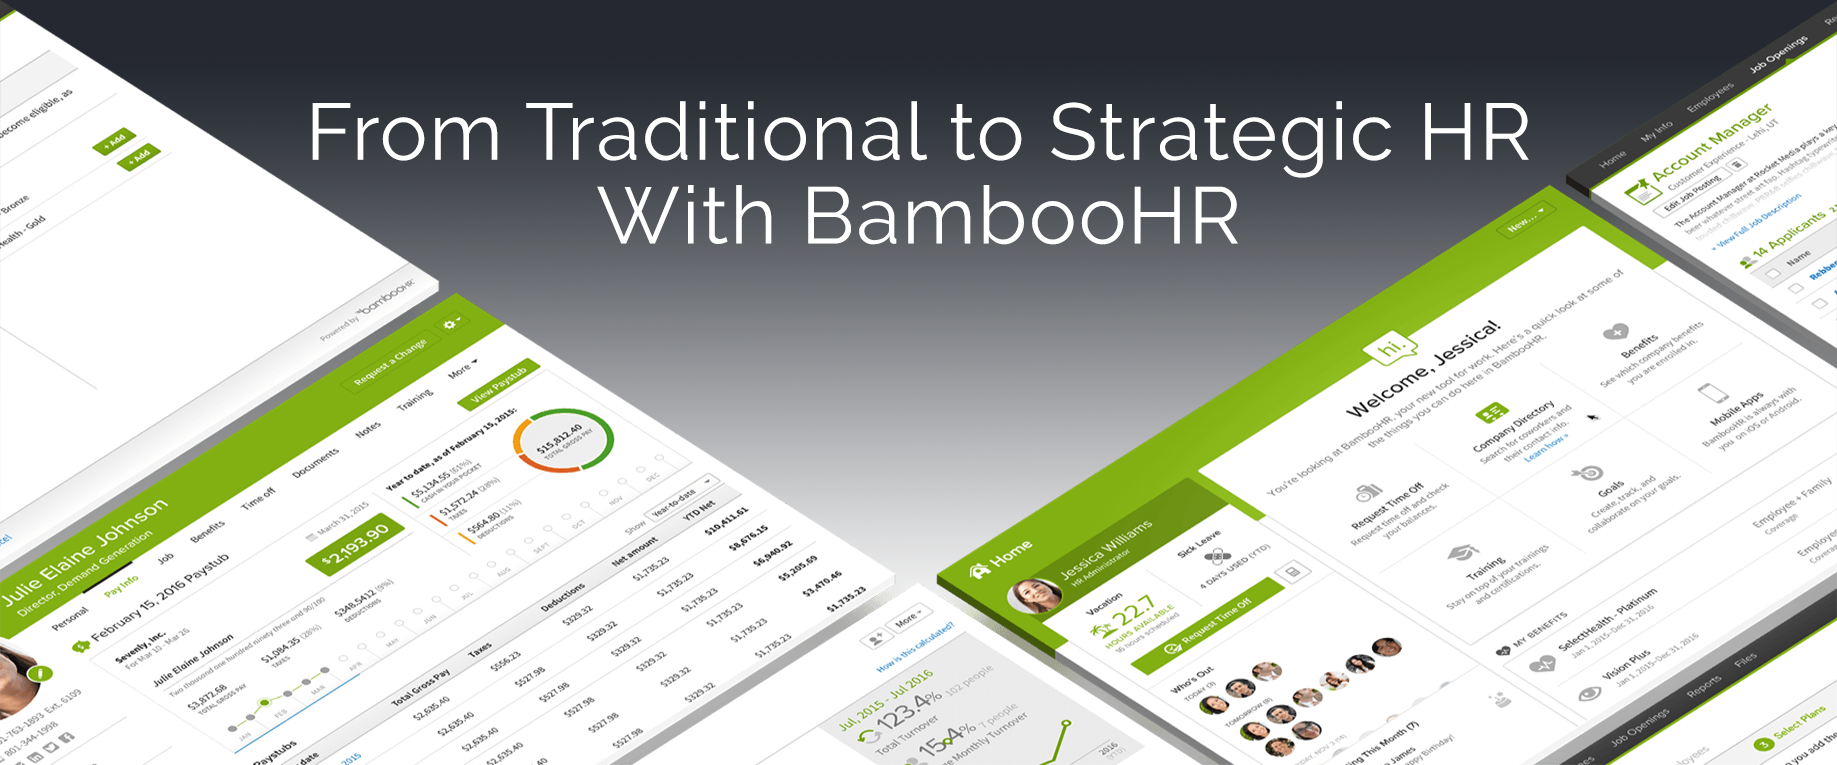 Transition from traditional to strategic HR with BambooHR